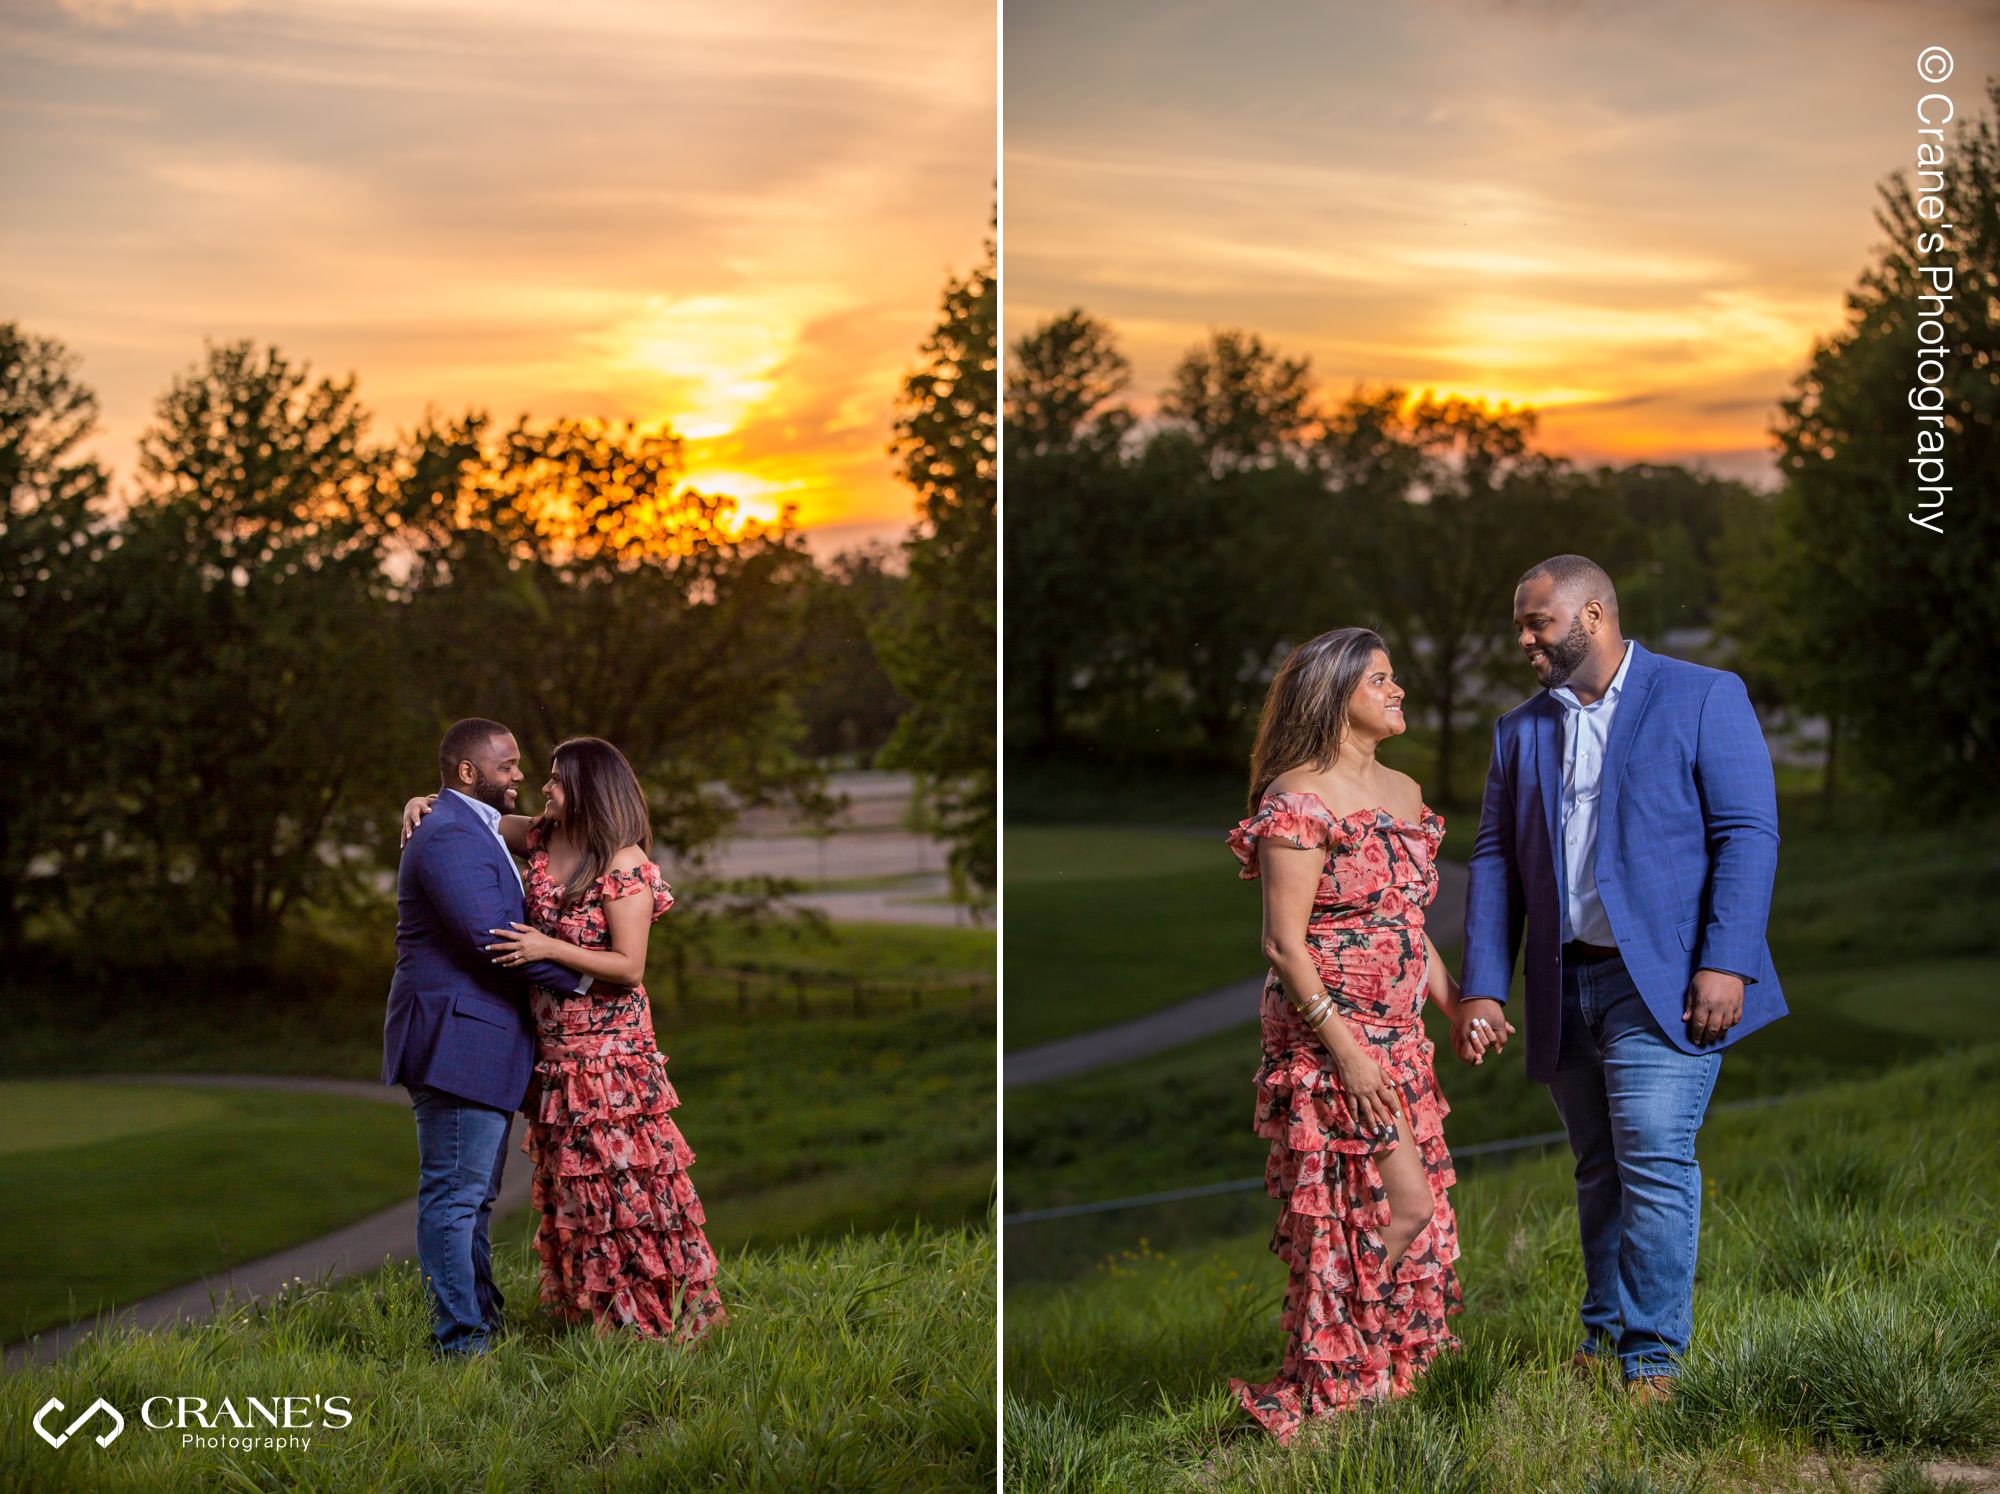 Styled engagement image with a beautiful image in Wheaton, IL.